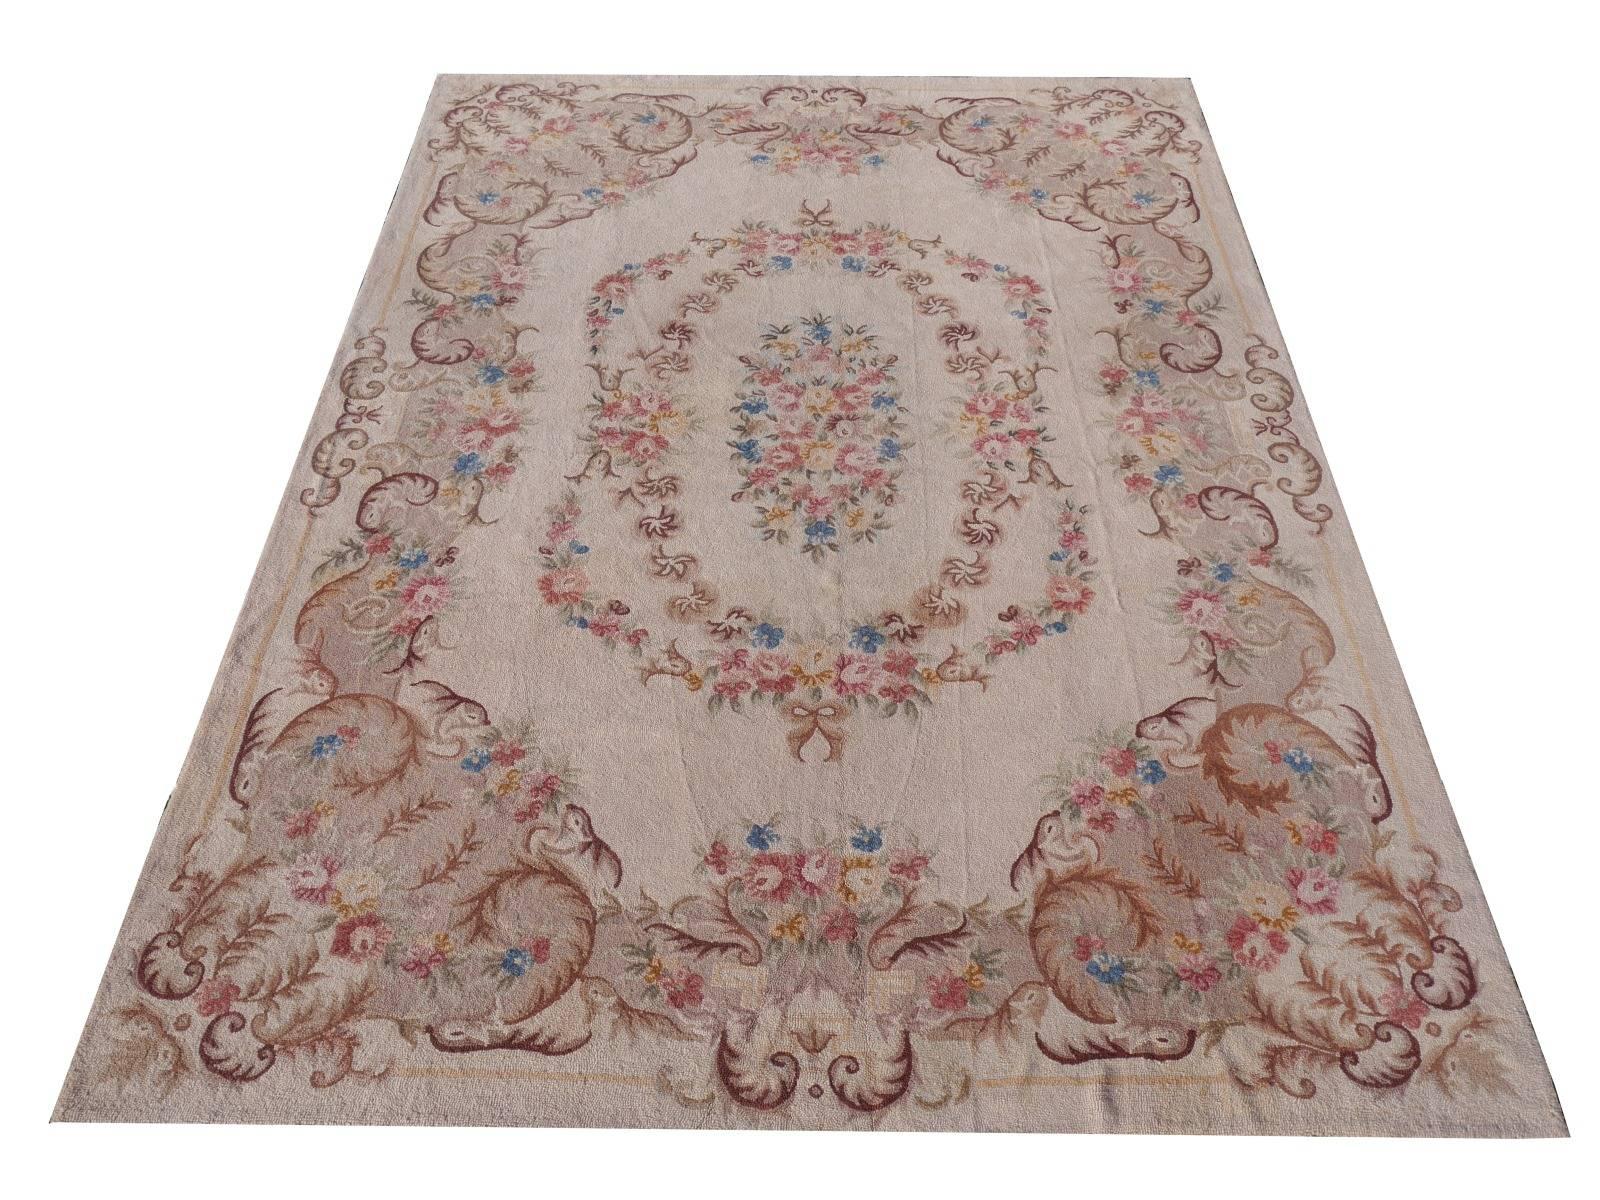 We are offering a one of a kind needlepoint rug, handmade in Portugal. It is from the Arts & Crafts period in the mid 1920s. The design is strongly influenced by frensh Savonnerie carpets of the 19th century. The condition is exquisite (very small